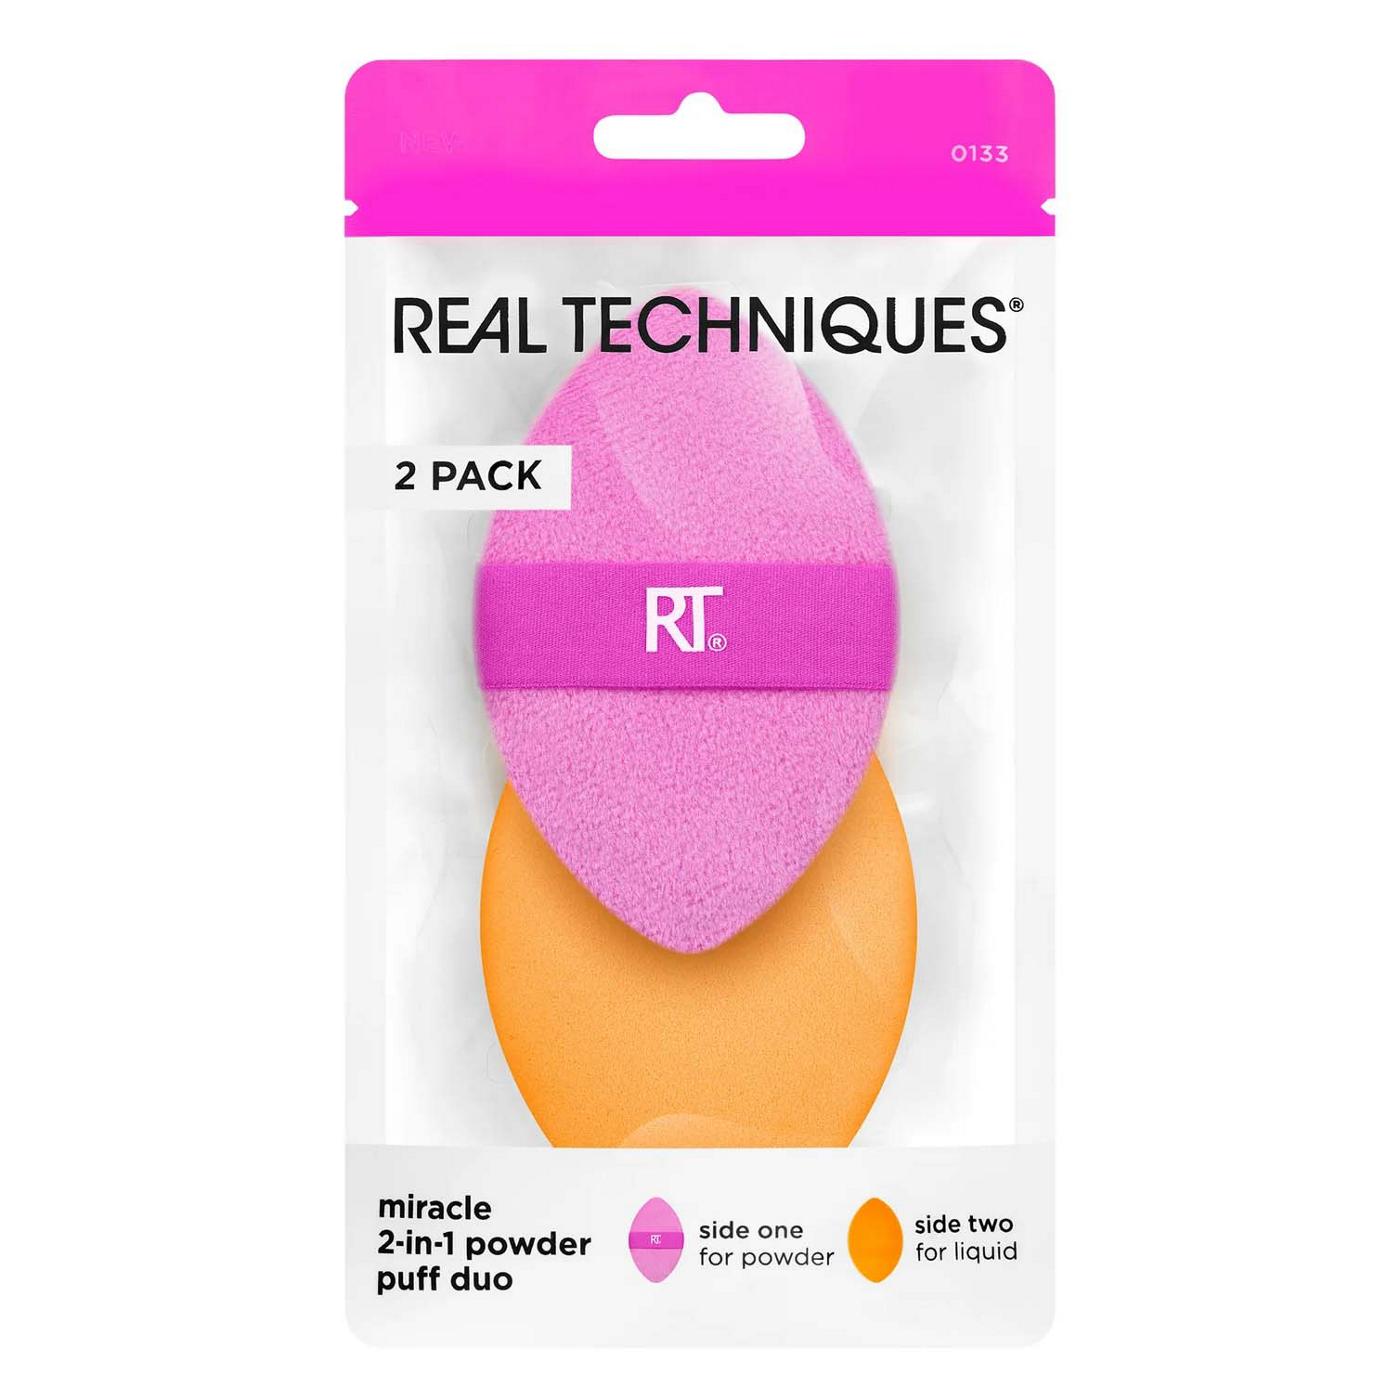 Real Techniques Miracle 2-In-1 Powder Puff Duo; image 1 of 3